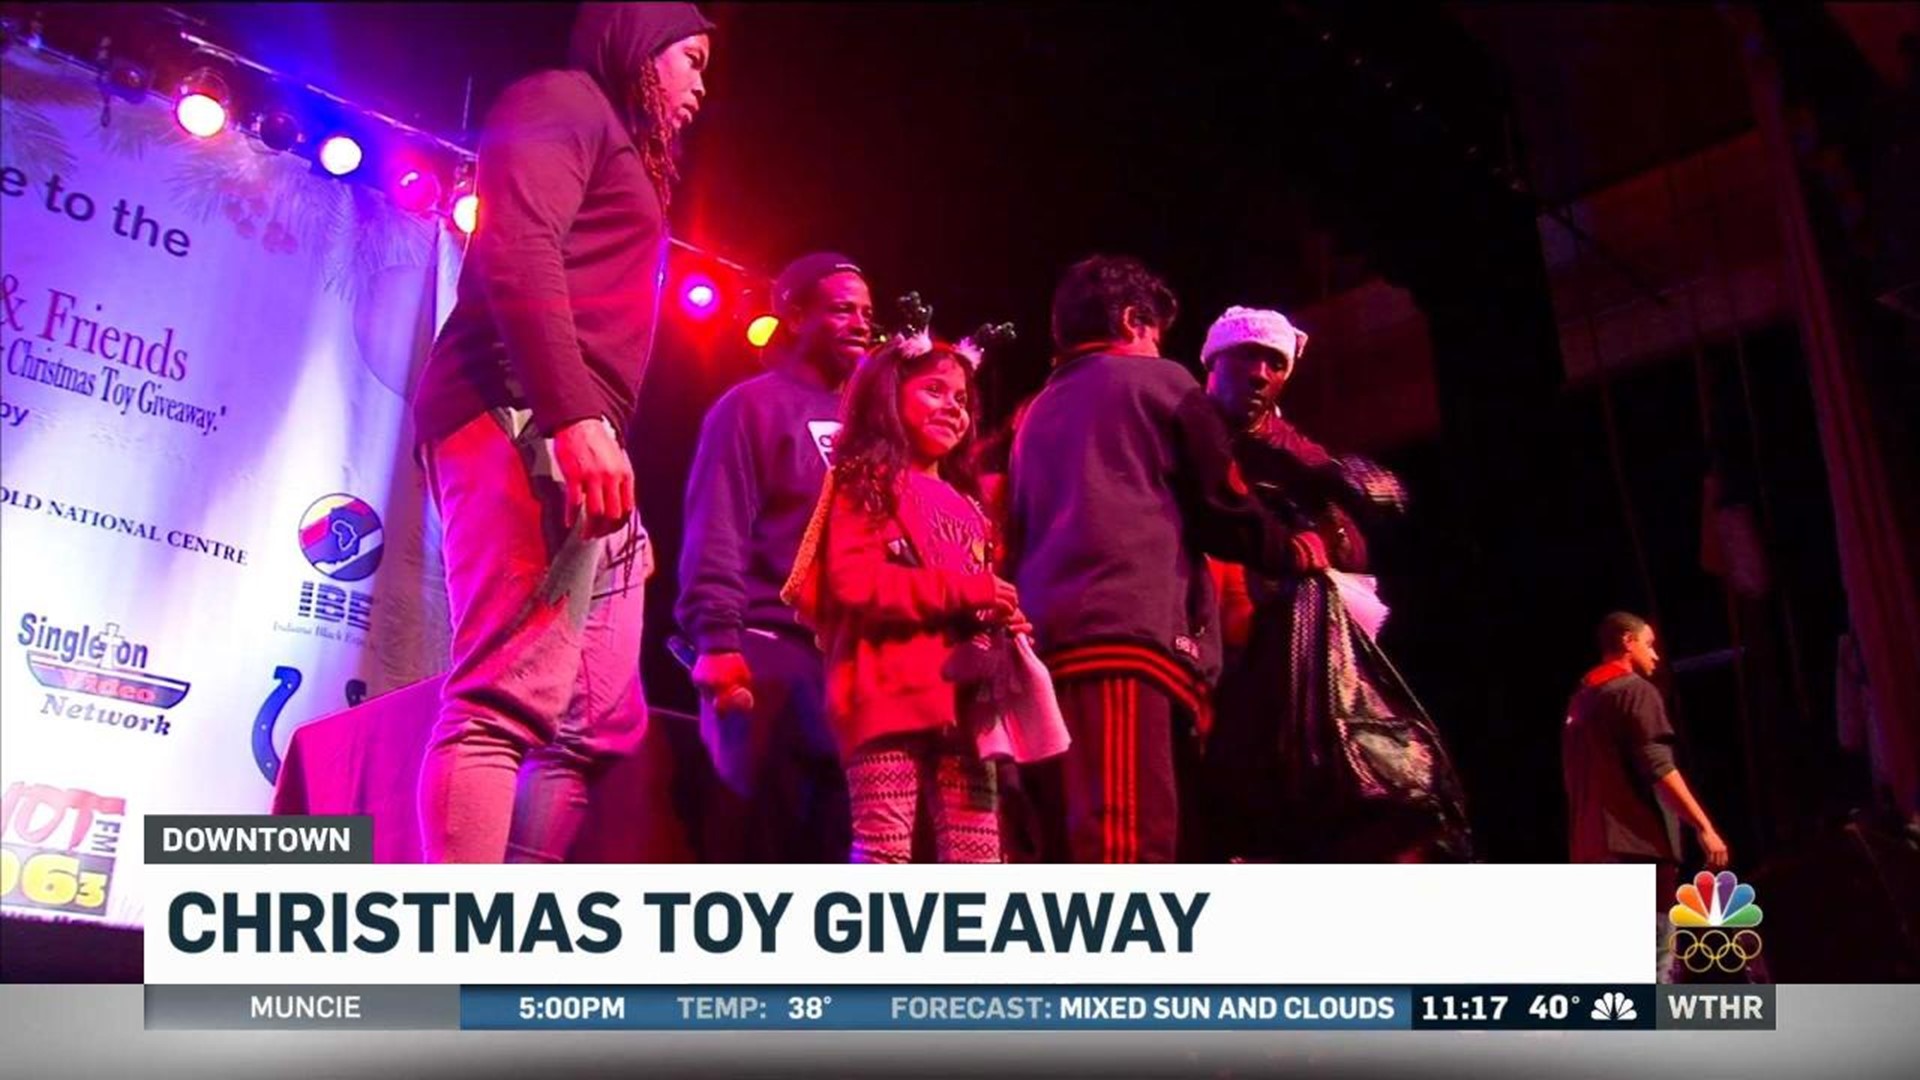 Christmas toy giveaway benefits hundreds